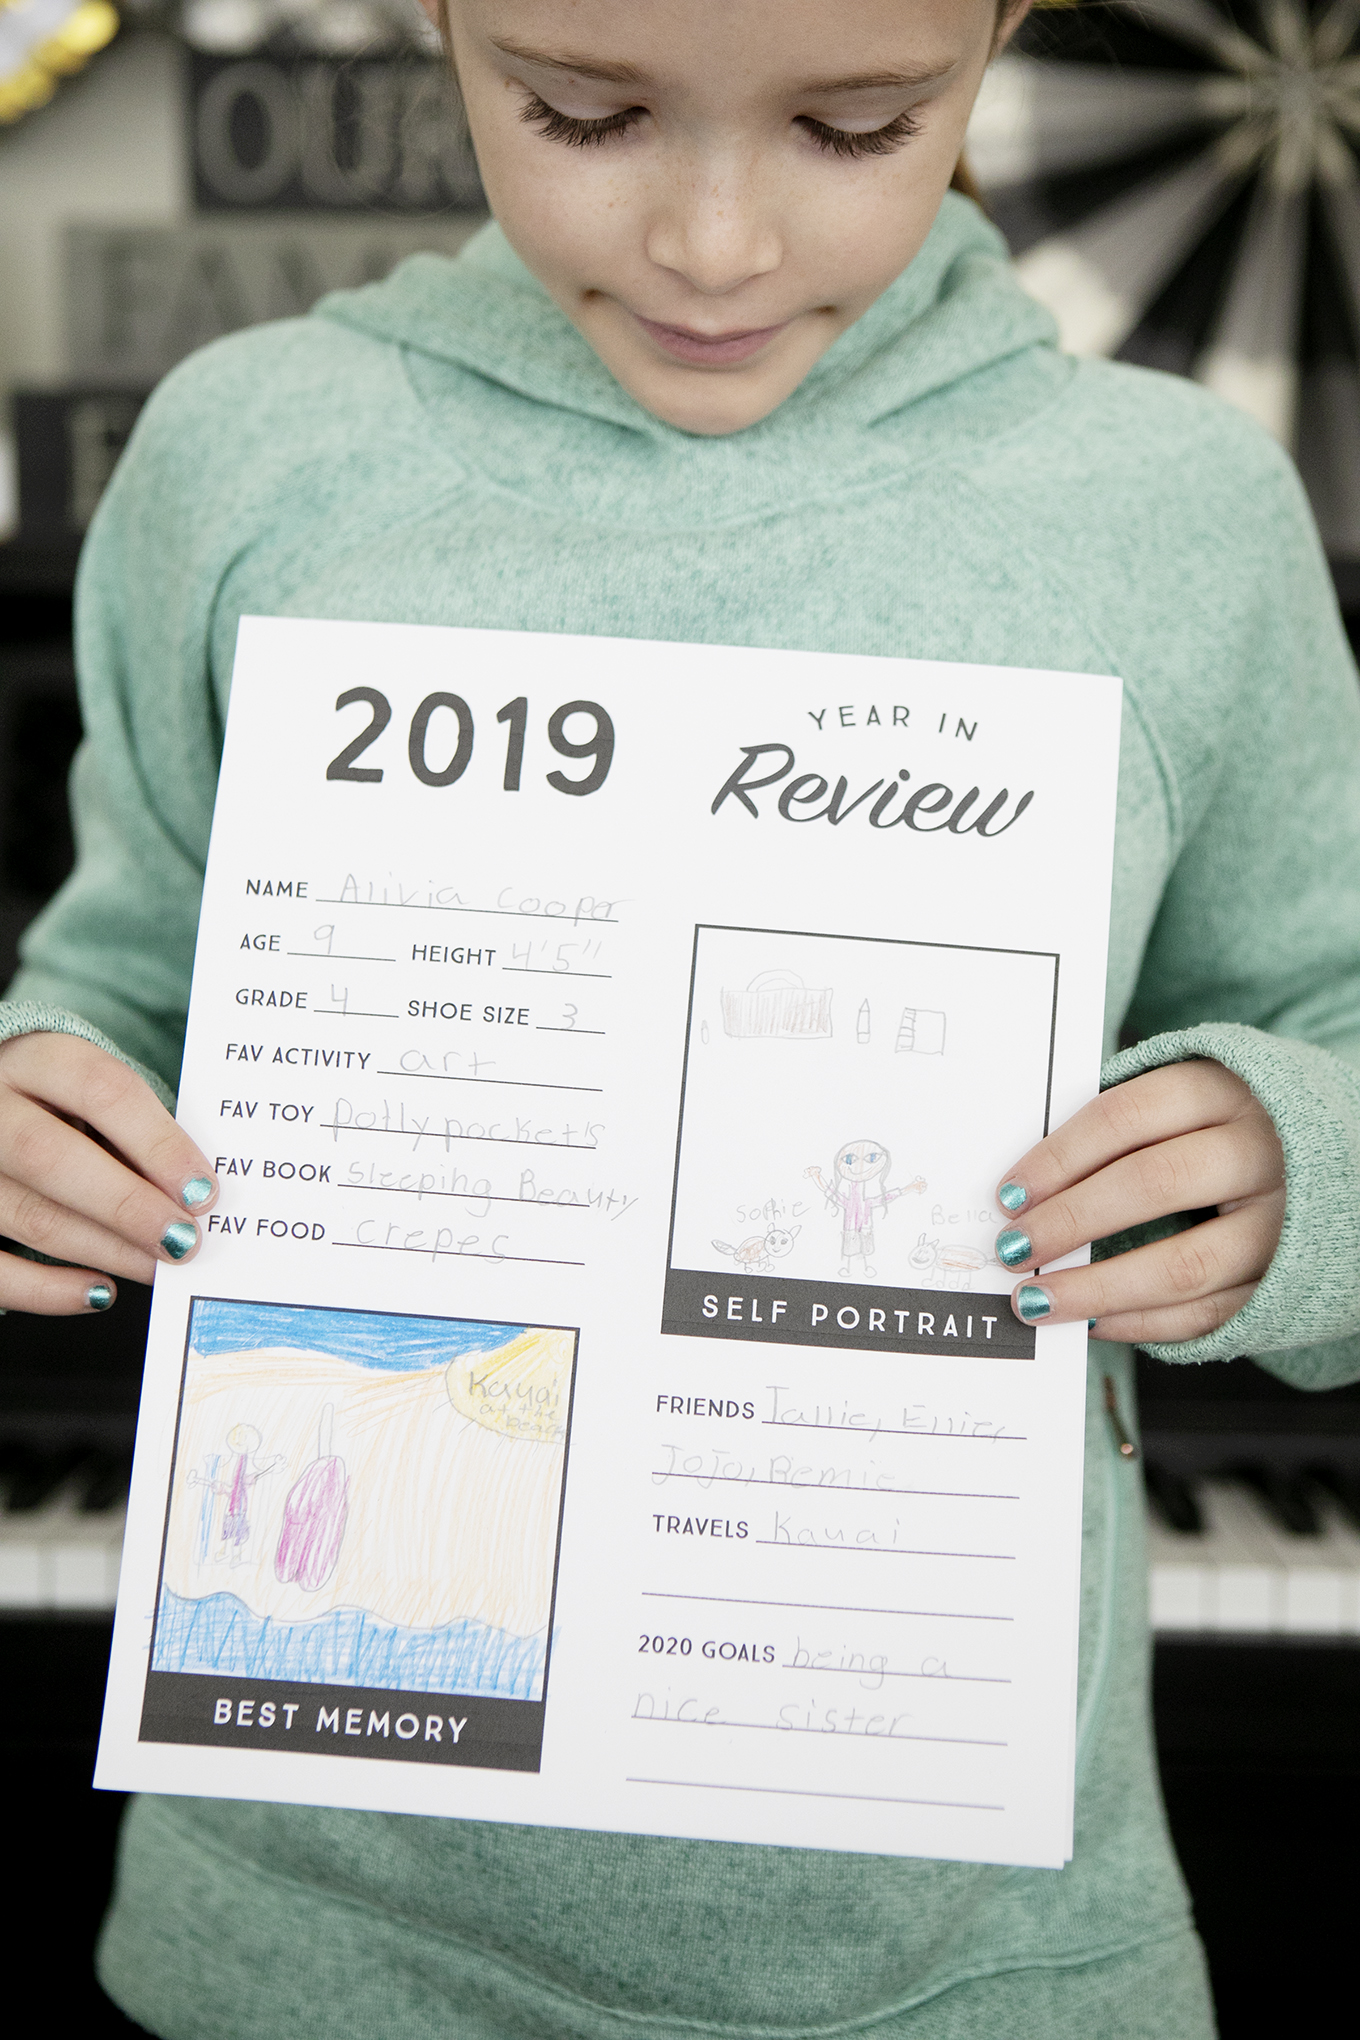 Year in Review Printable for Kids – this free printable year in review sheet gives children a chance to reflect on their favorite memories from the past 12 months and look ahead to new goals and adventures in the coming year!